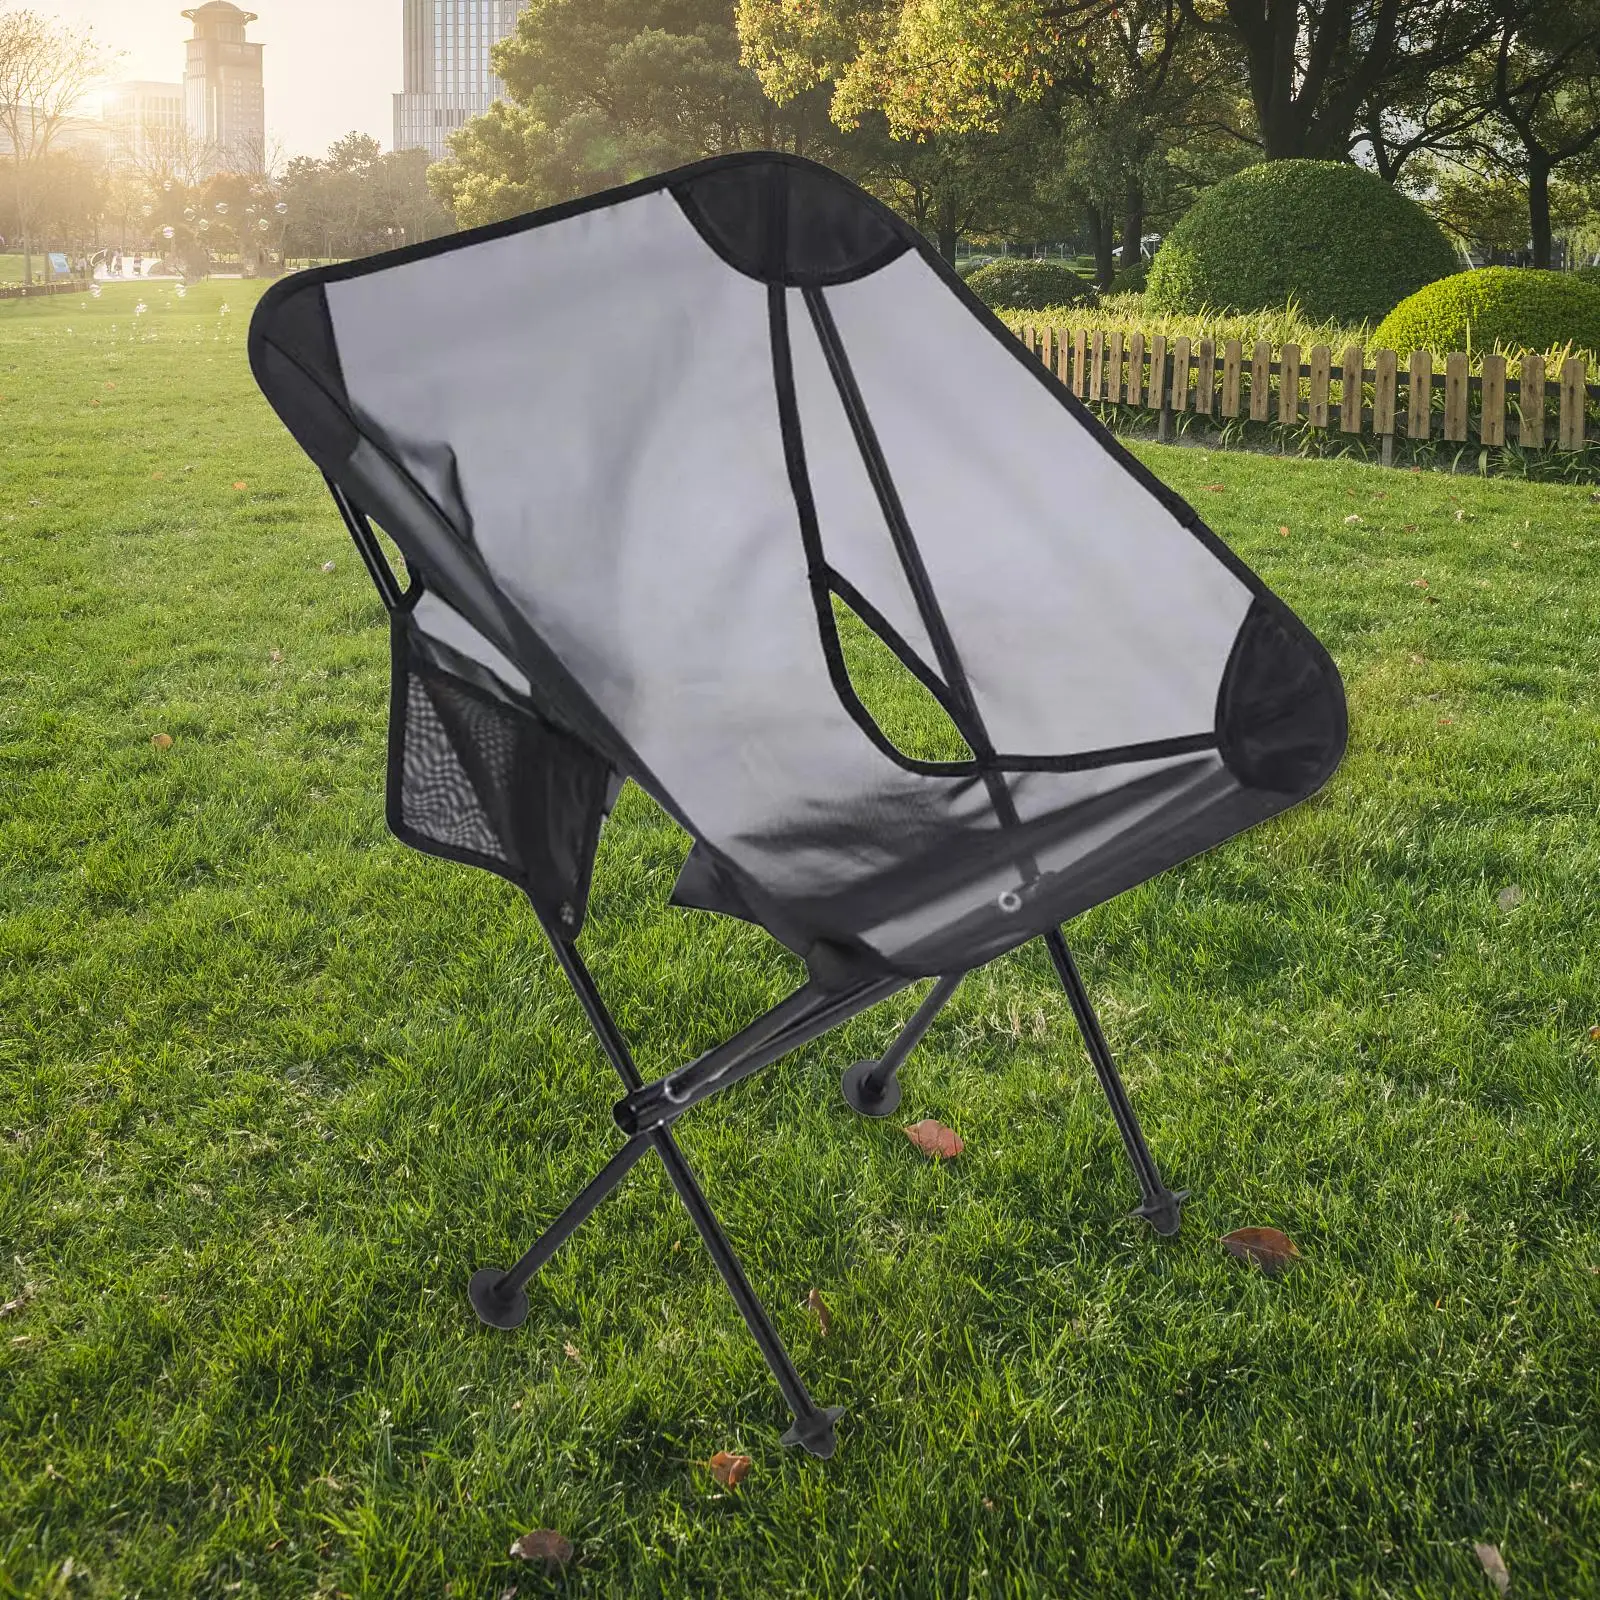 Folding Camping Chair Folding Chair Outdoor Concerts Sporting Events Parks Picnics Campings Camping Picnic Chair Beach Chair